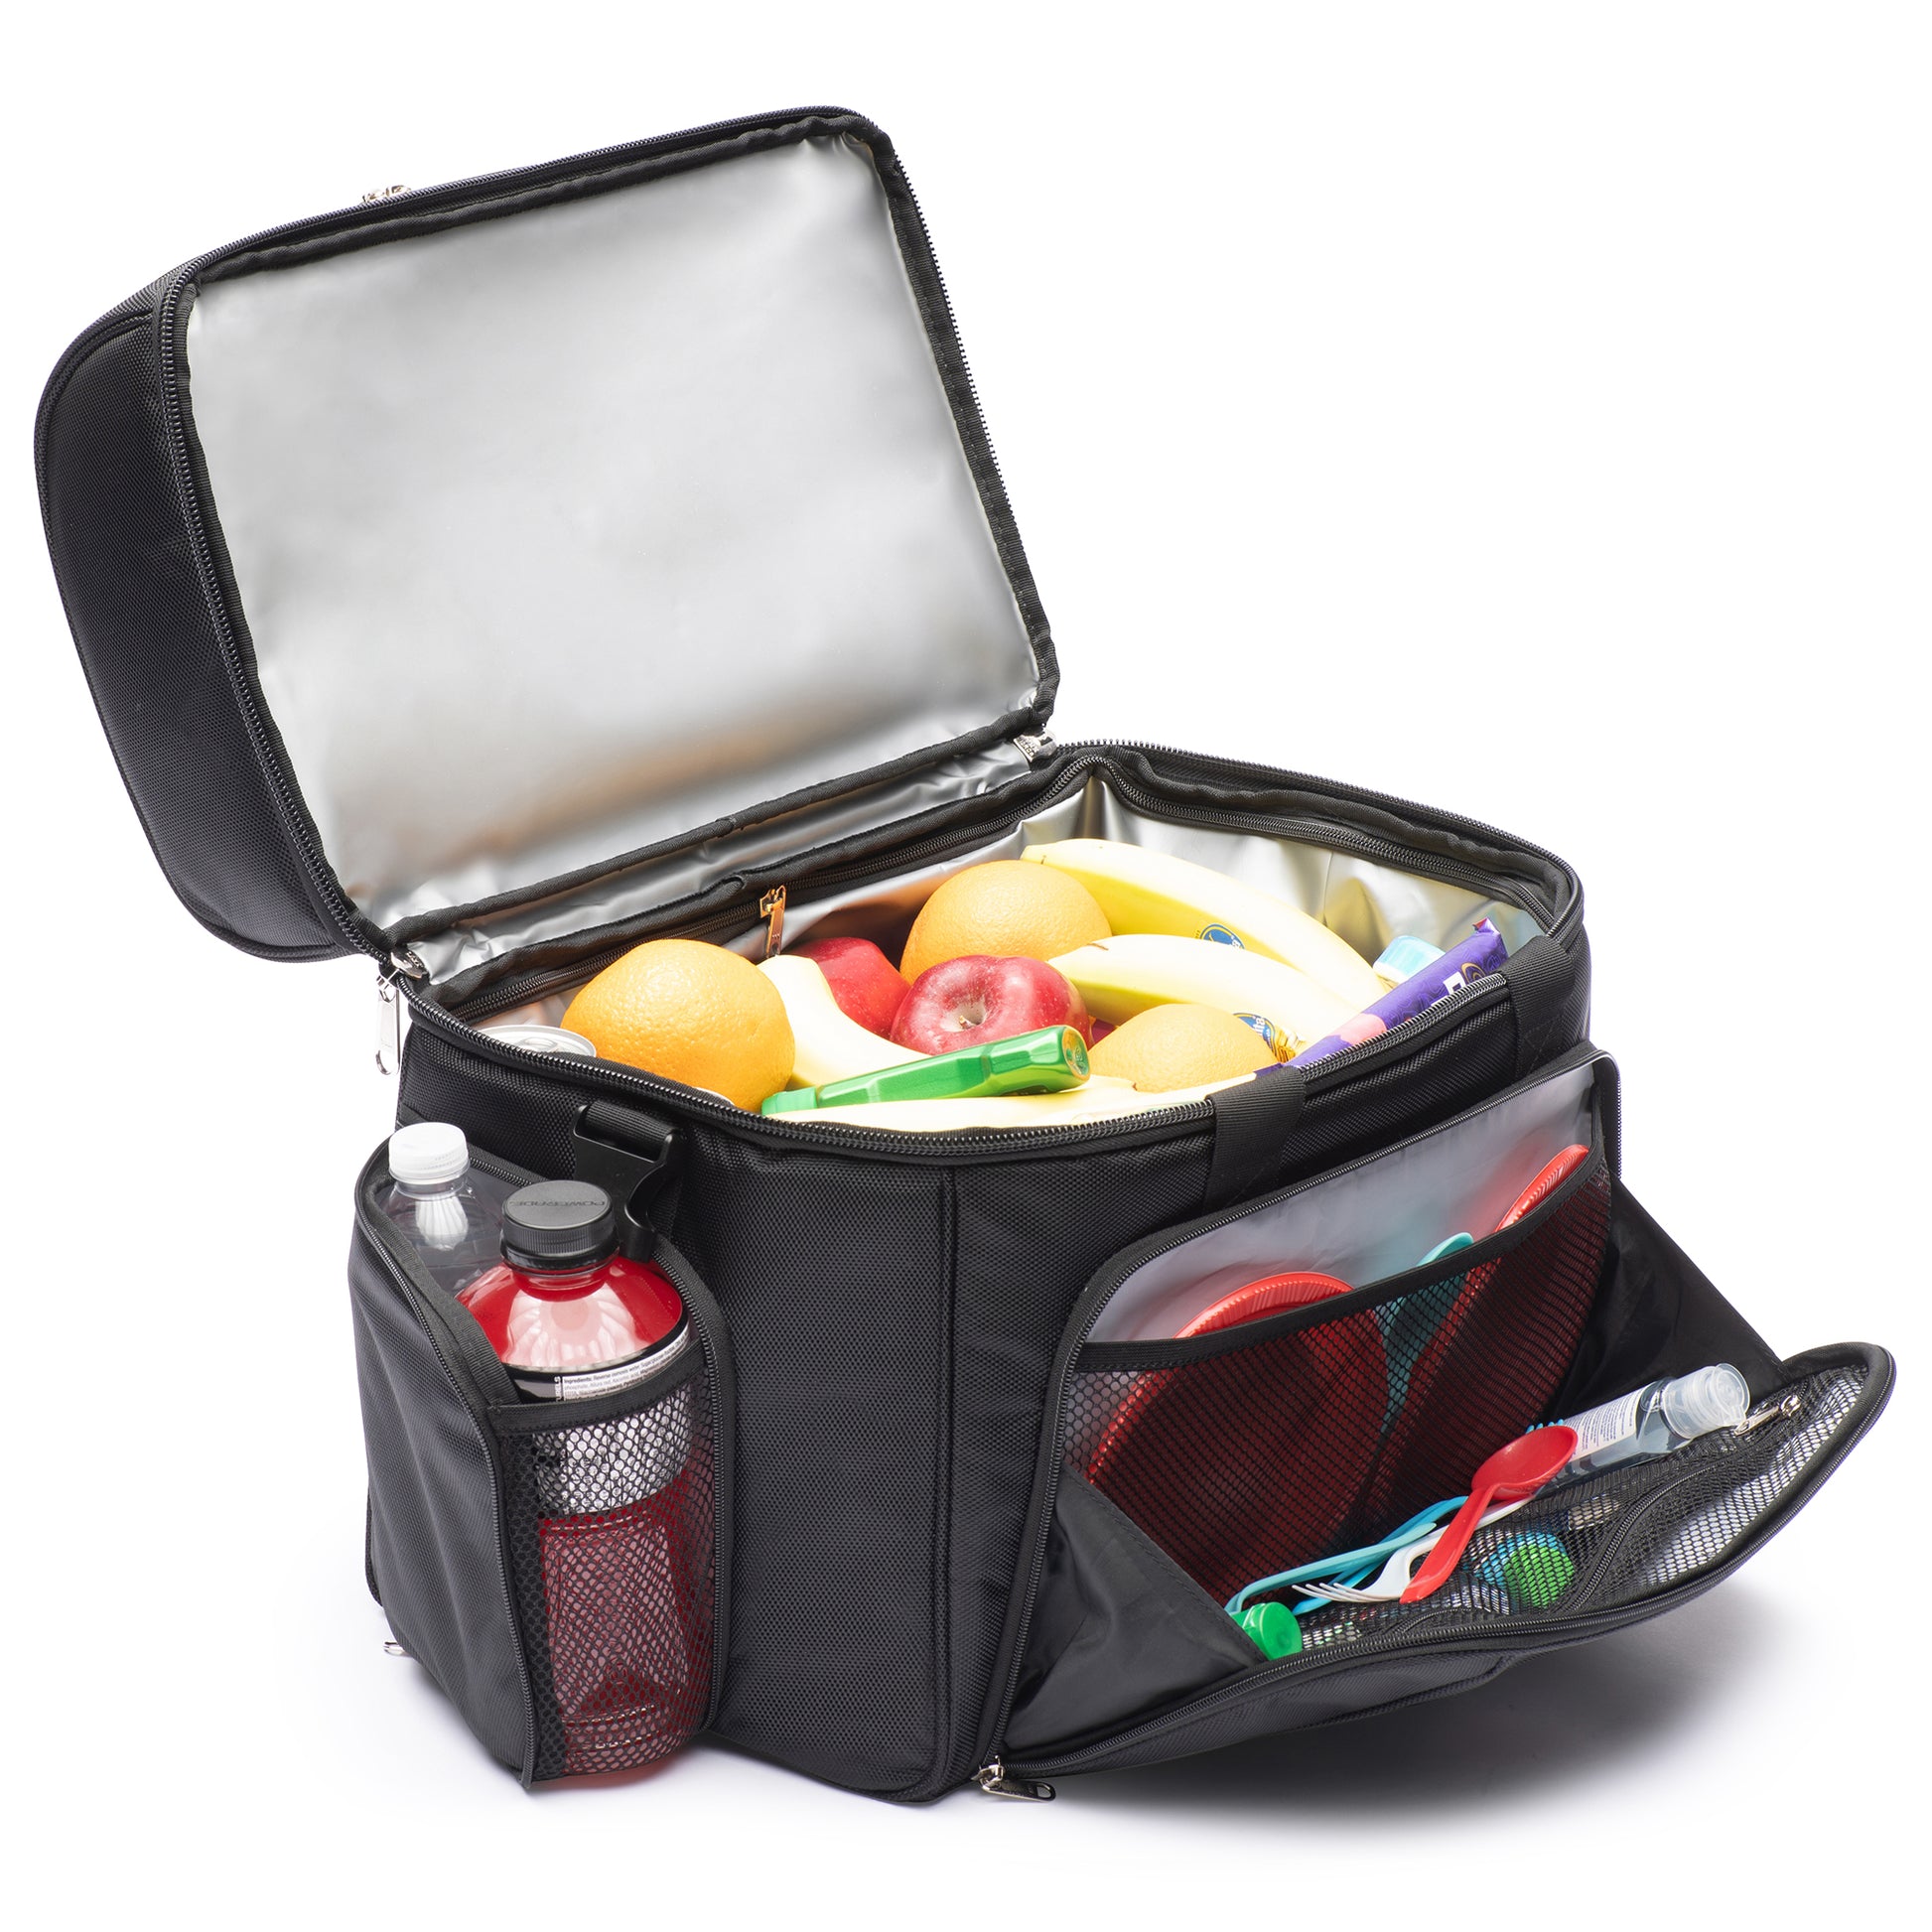  MOJECTO Medium Size Cooler Lunch Bag With Removable Leakproof  Plastic Hardliner Bucket. Dual compartment, 600D Strong Polyester, Thick  Foam Insulation, Large Pockets And Zippers. : Sports & Outdoors